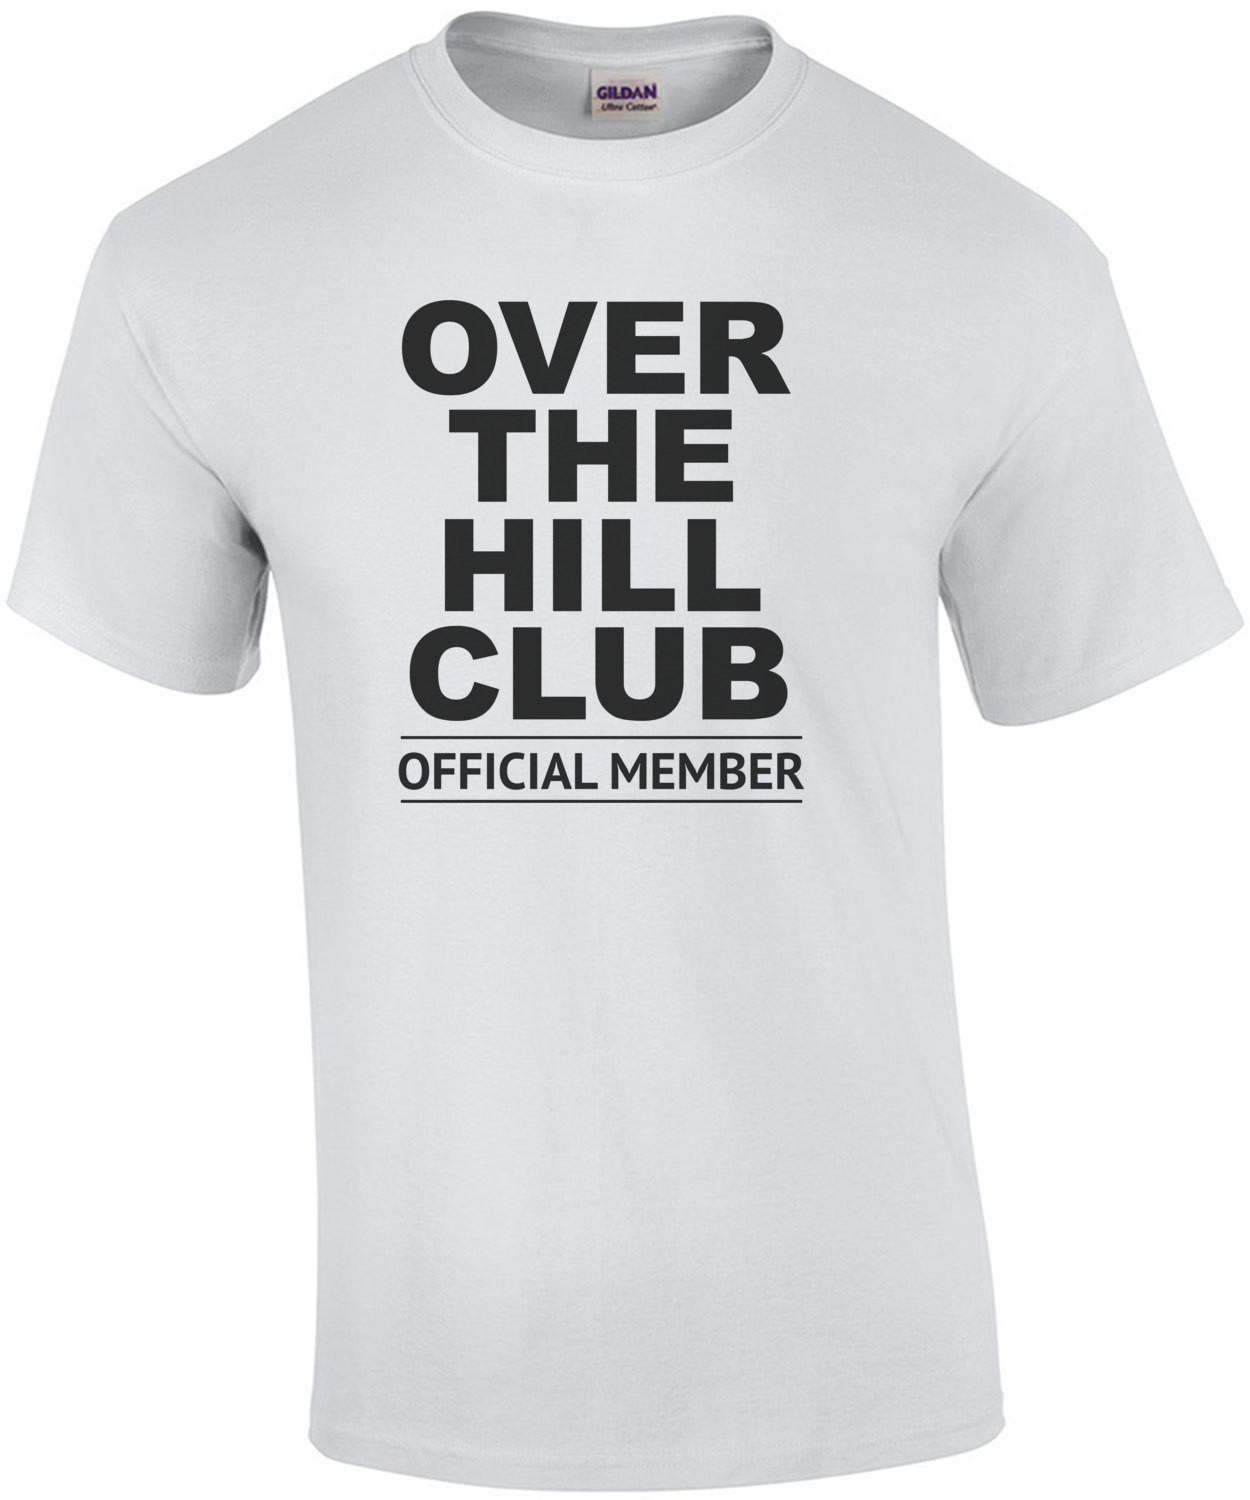 Over The Hill Club - Official Member - 40th birthday t-shirt